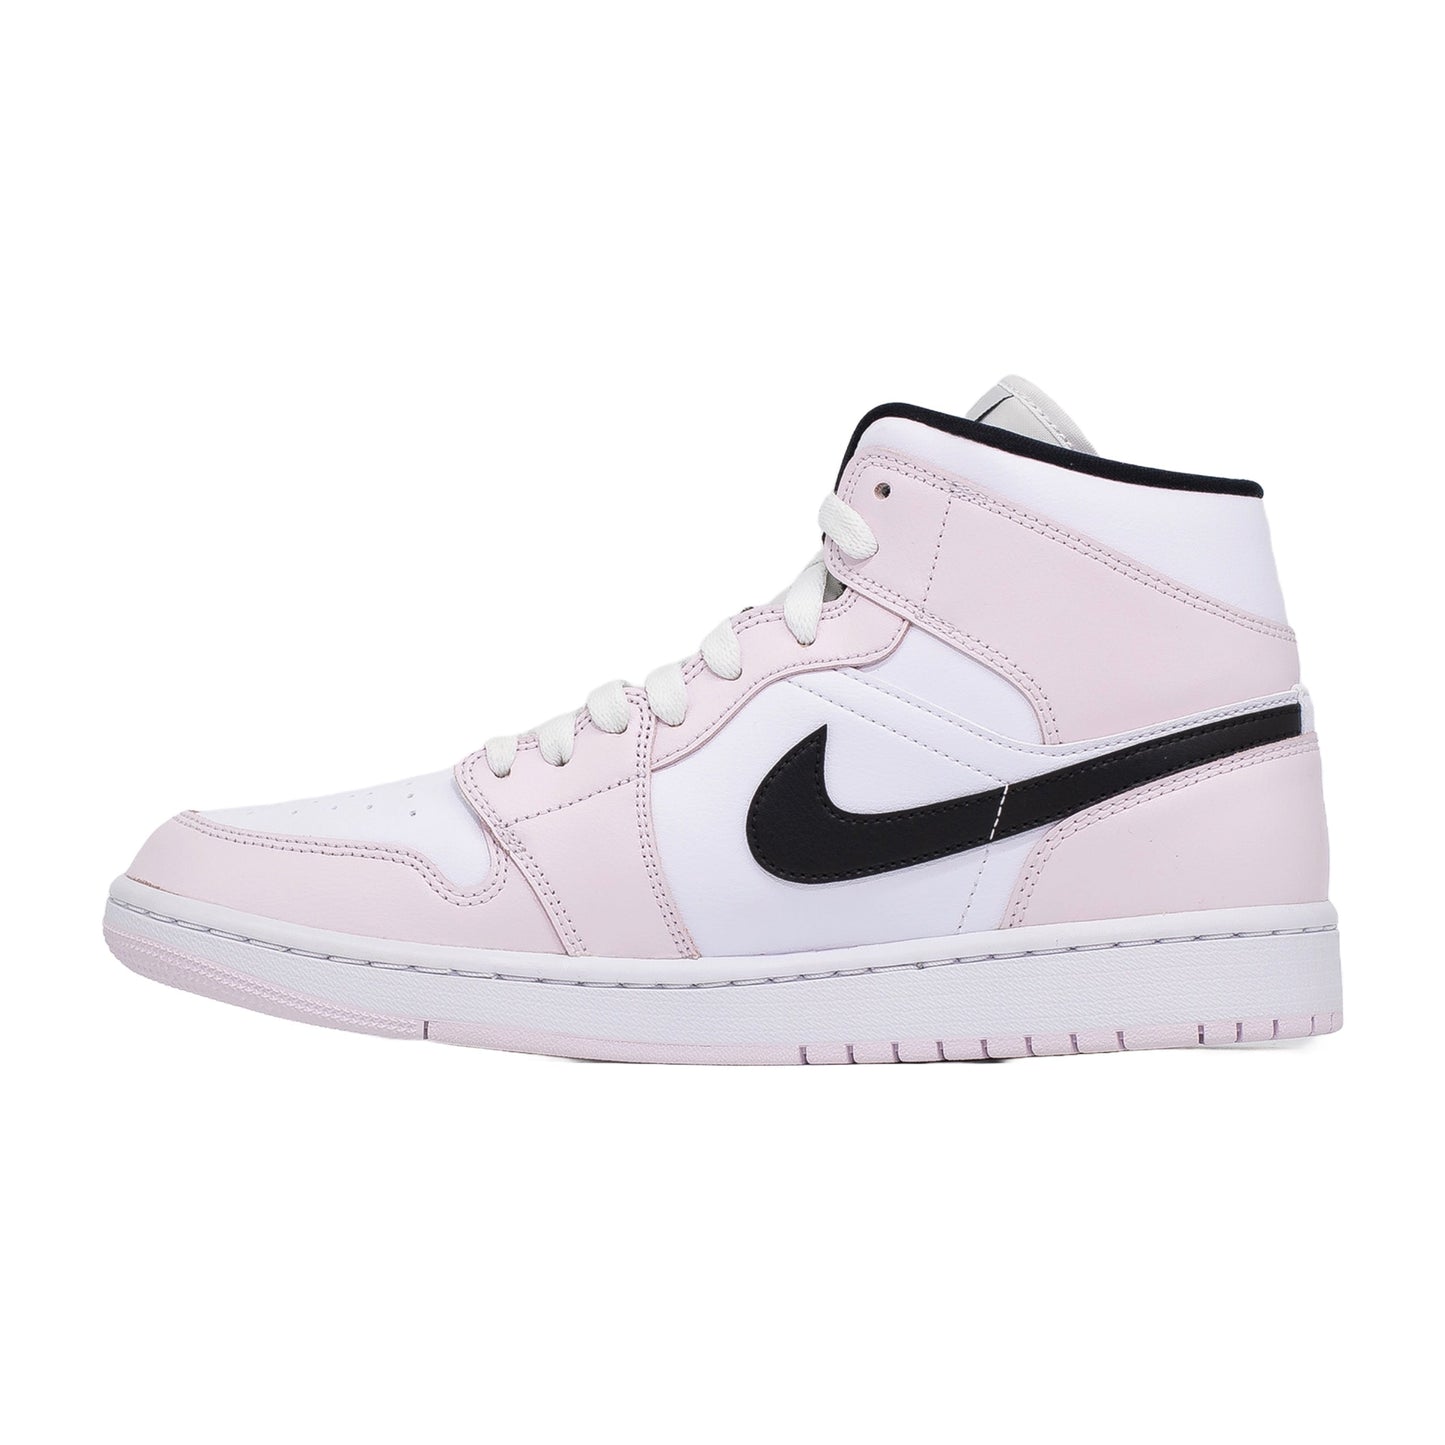 Women's Air air jordan 1 retro high nrg chi homage to home ar9880 023 for sale, Barely Rose